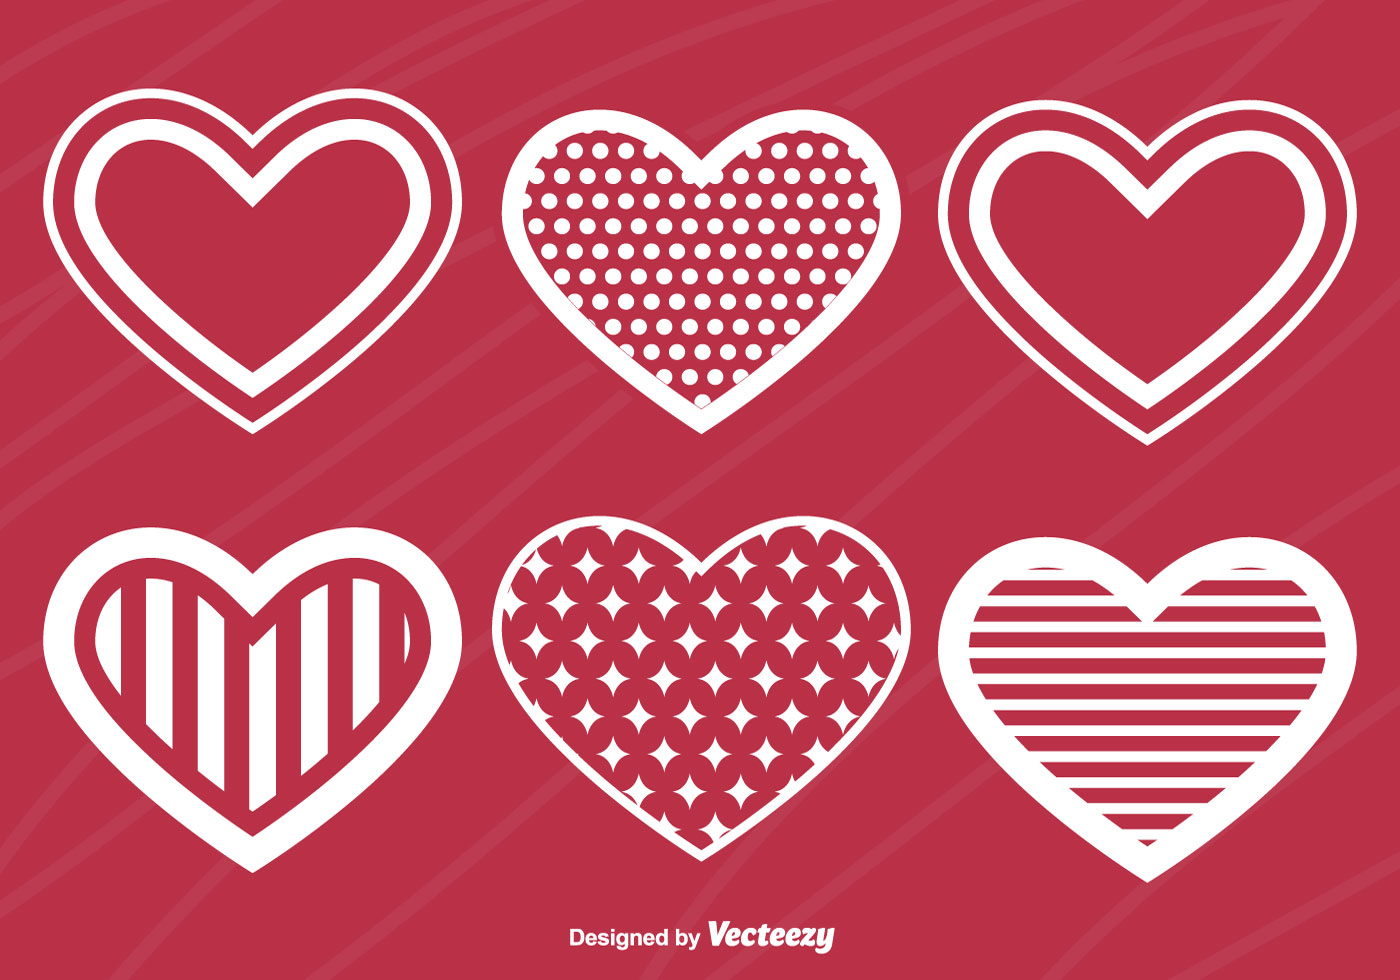 Download Heart Silhouettes - Download Free Vectors, Clipart ...